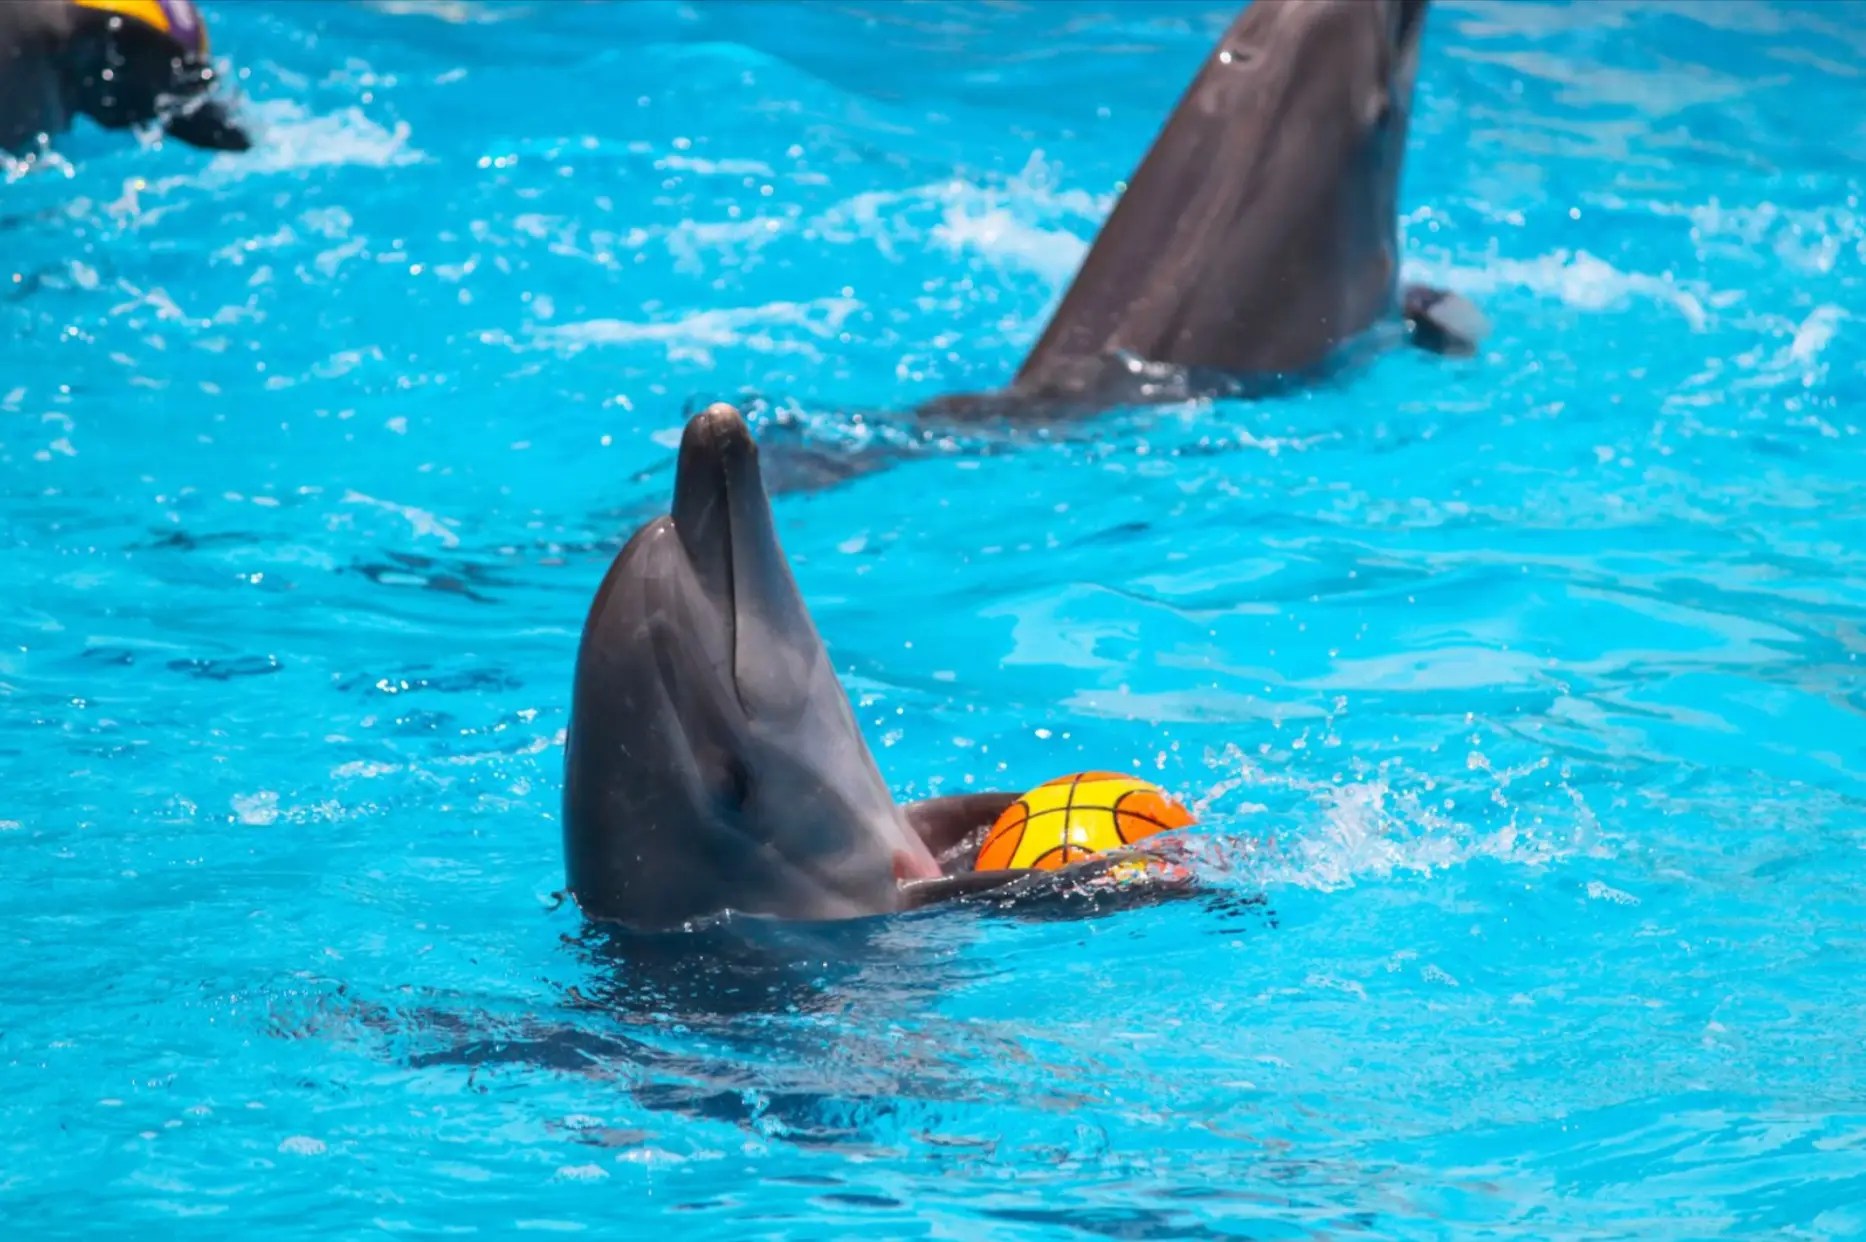 Dolphin in the water playing with a basketball.